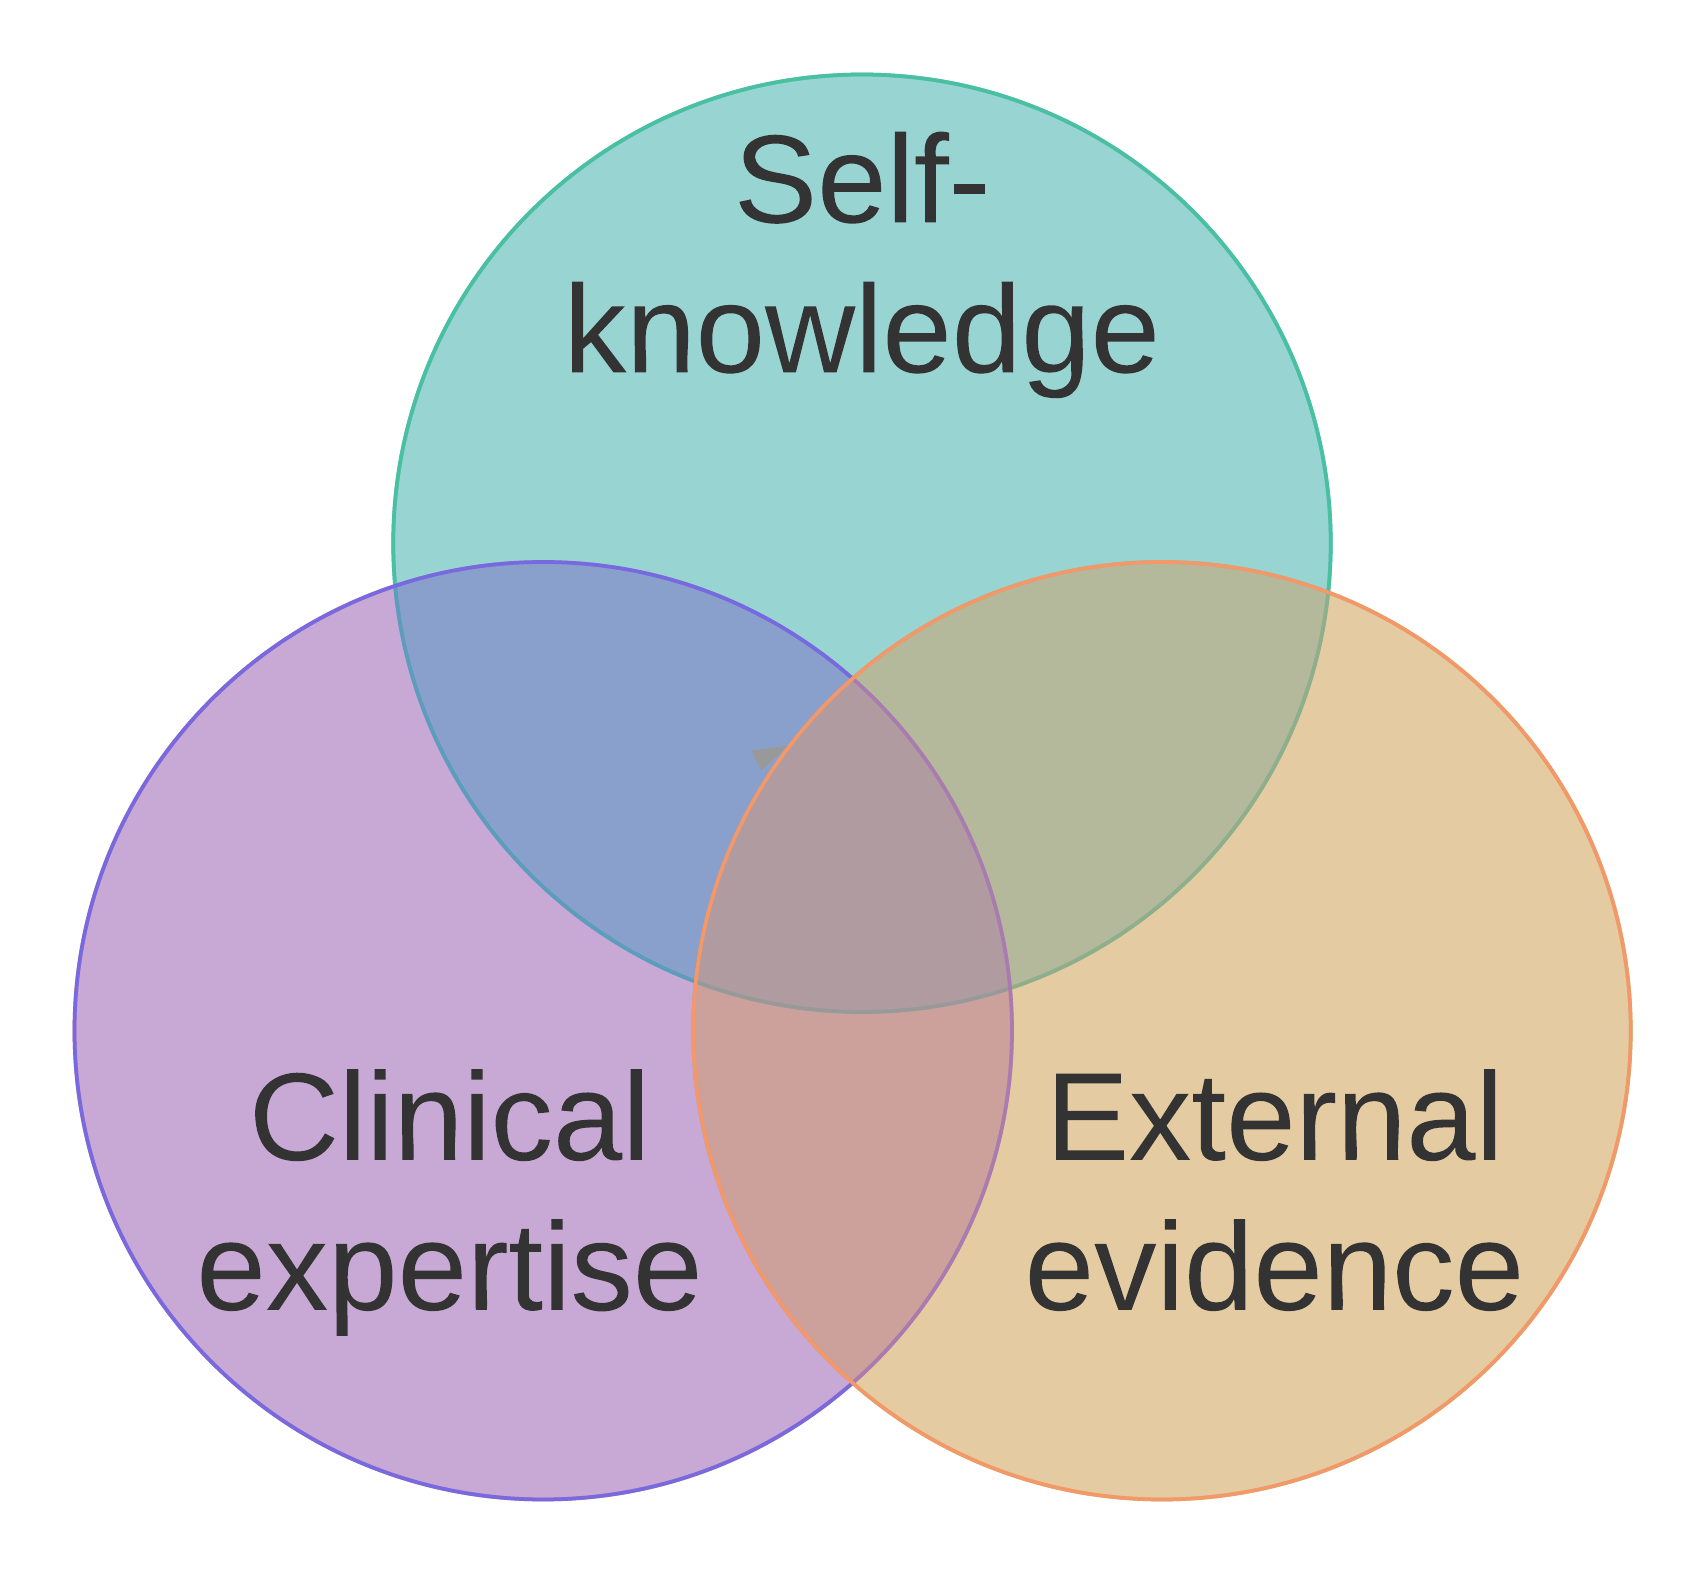 The intersection of self-knowledge, clincial expertise, and external evidence